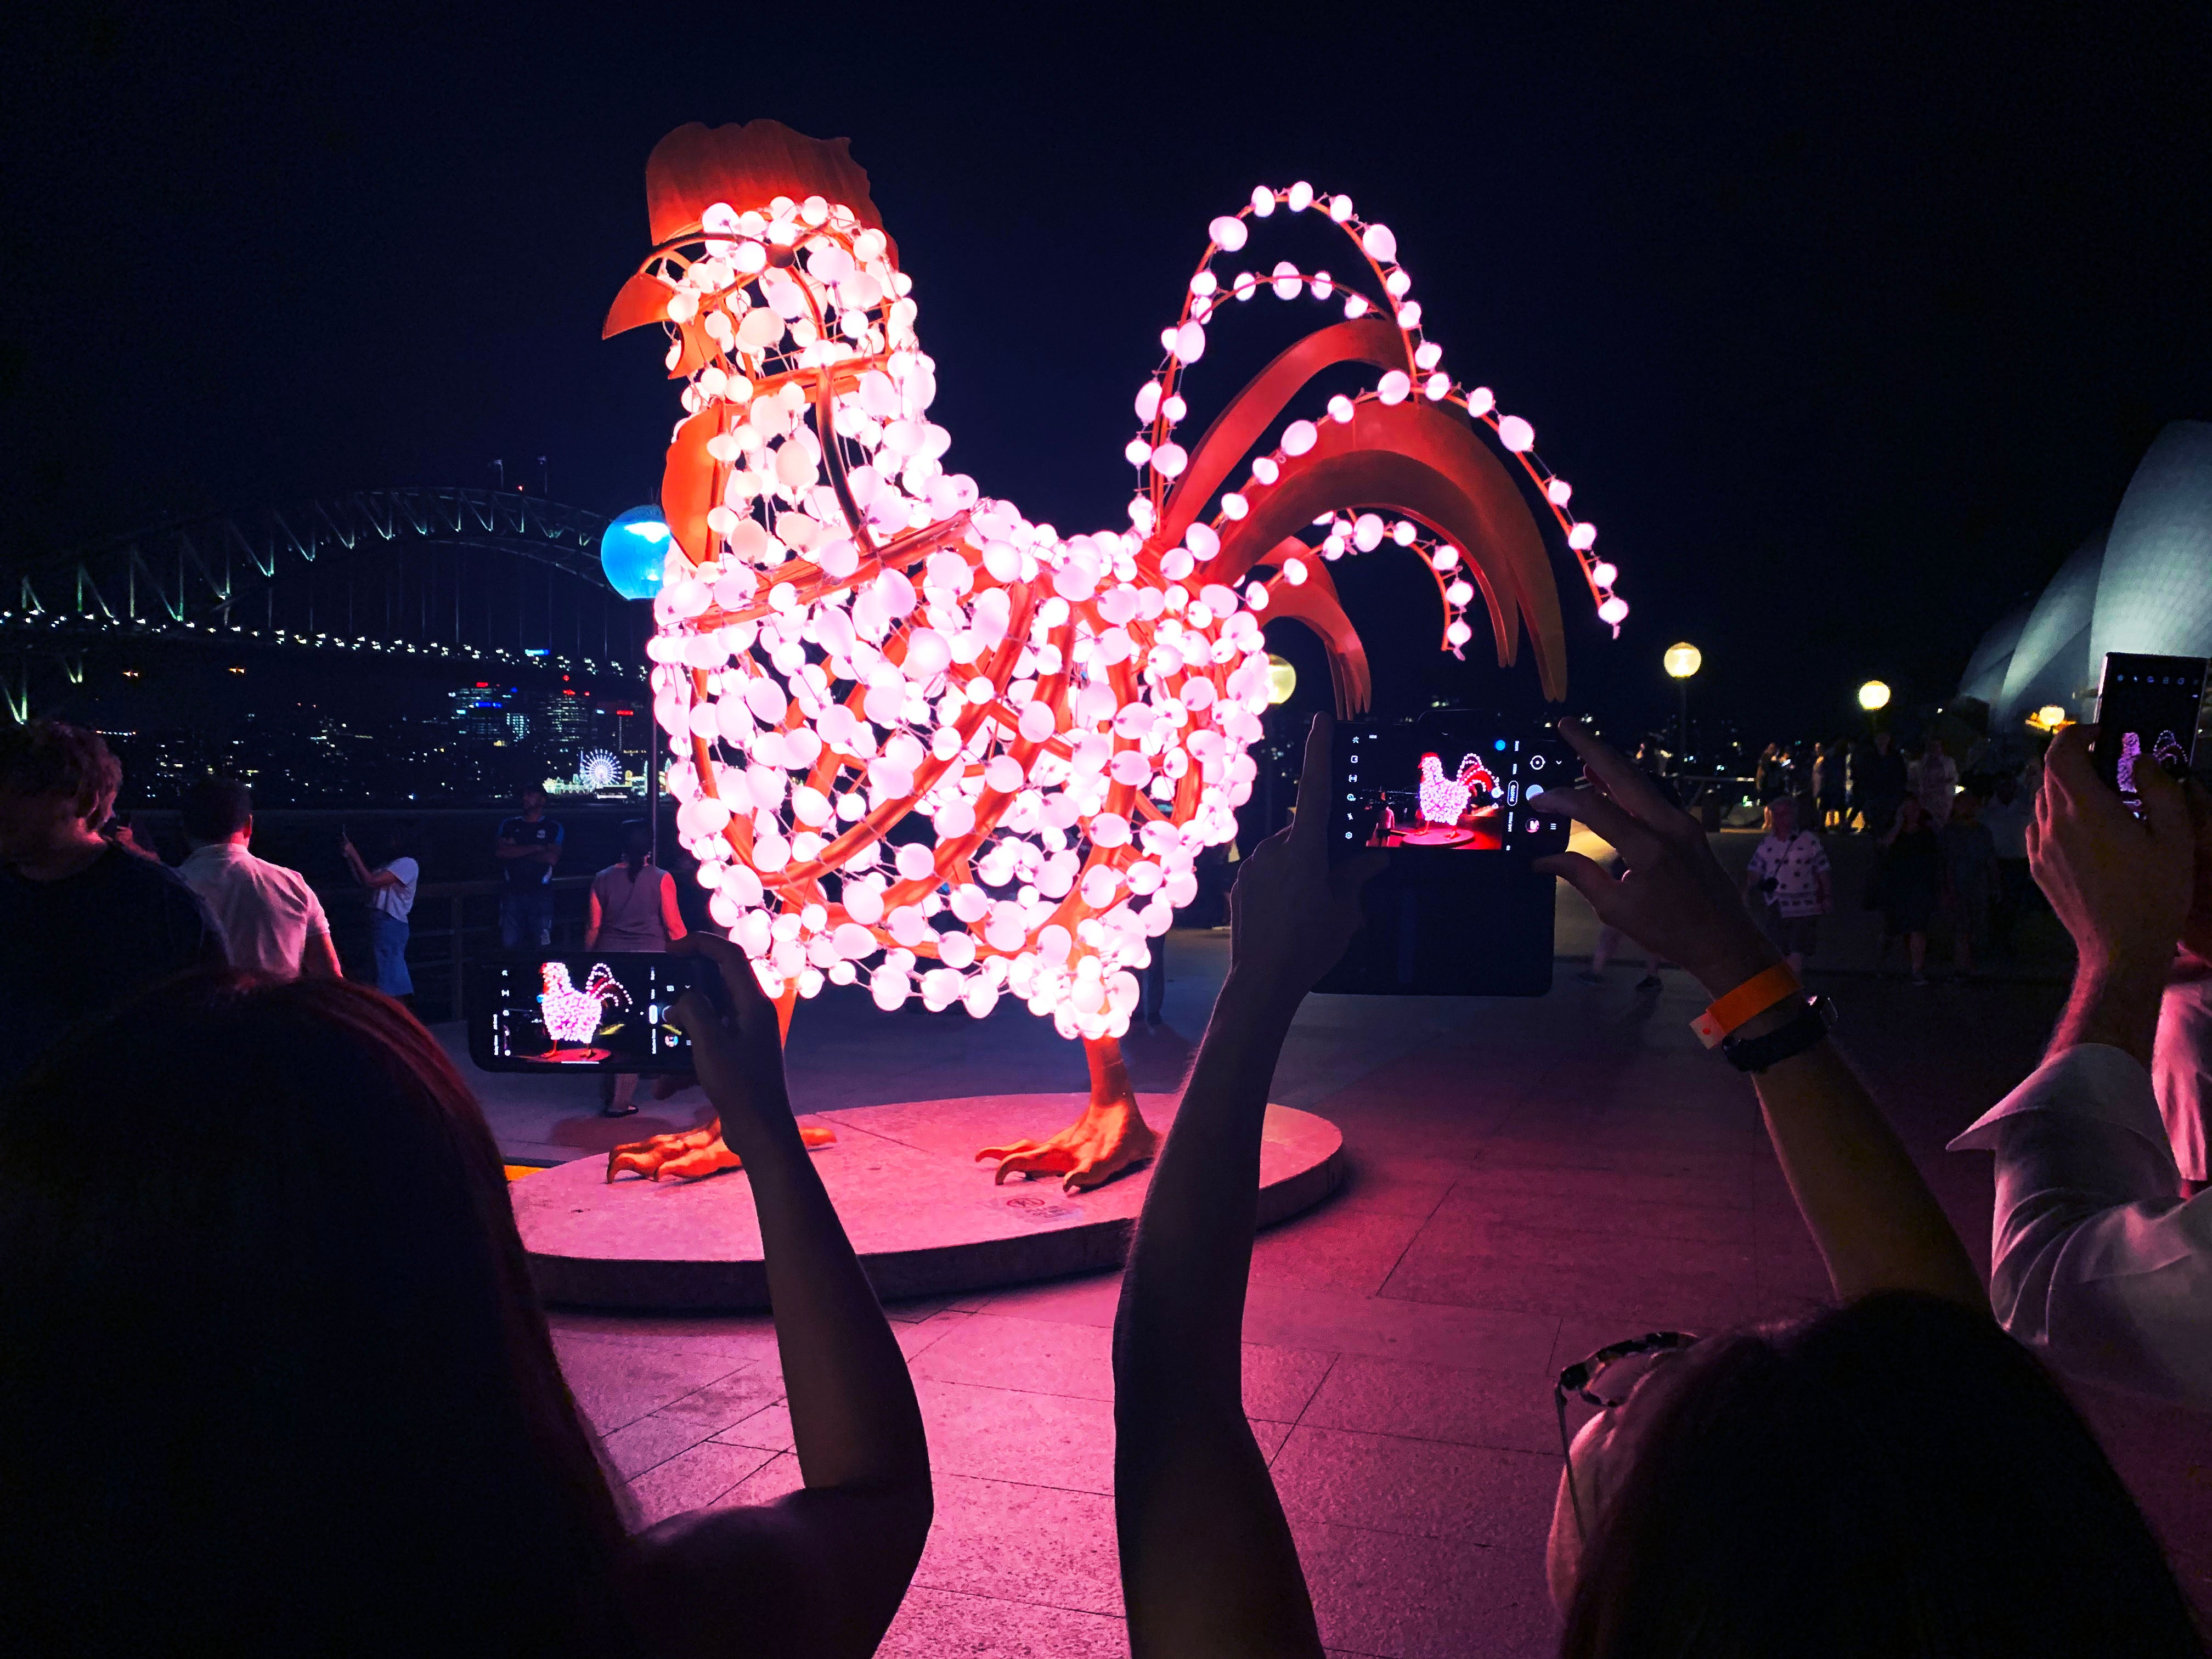 The Rooster art installation by Valerie Khoo